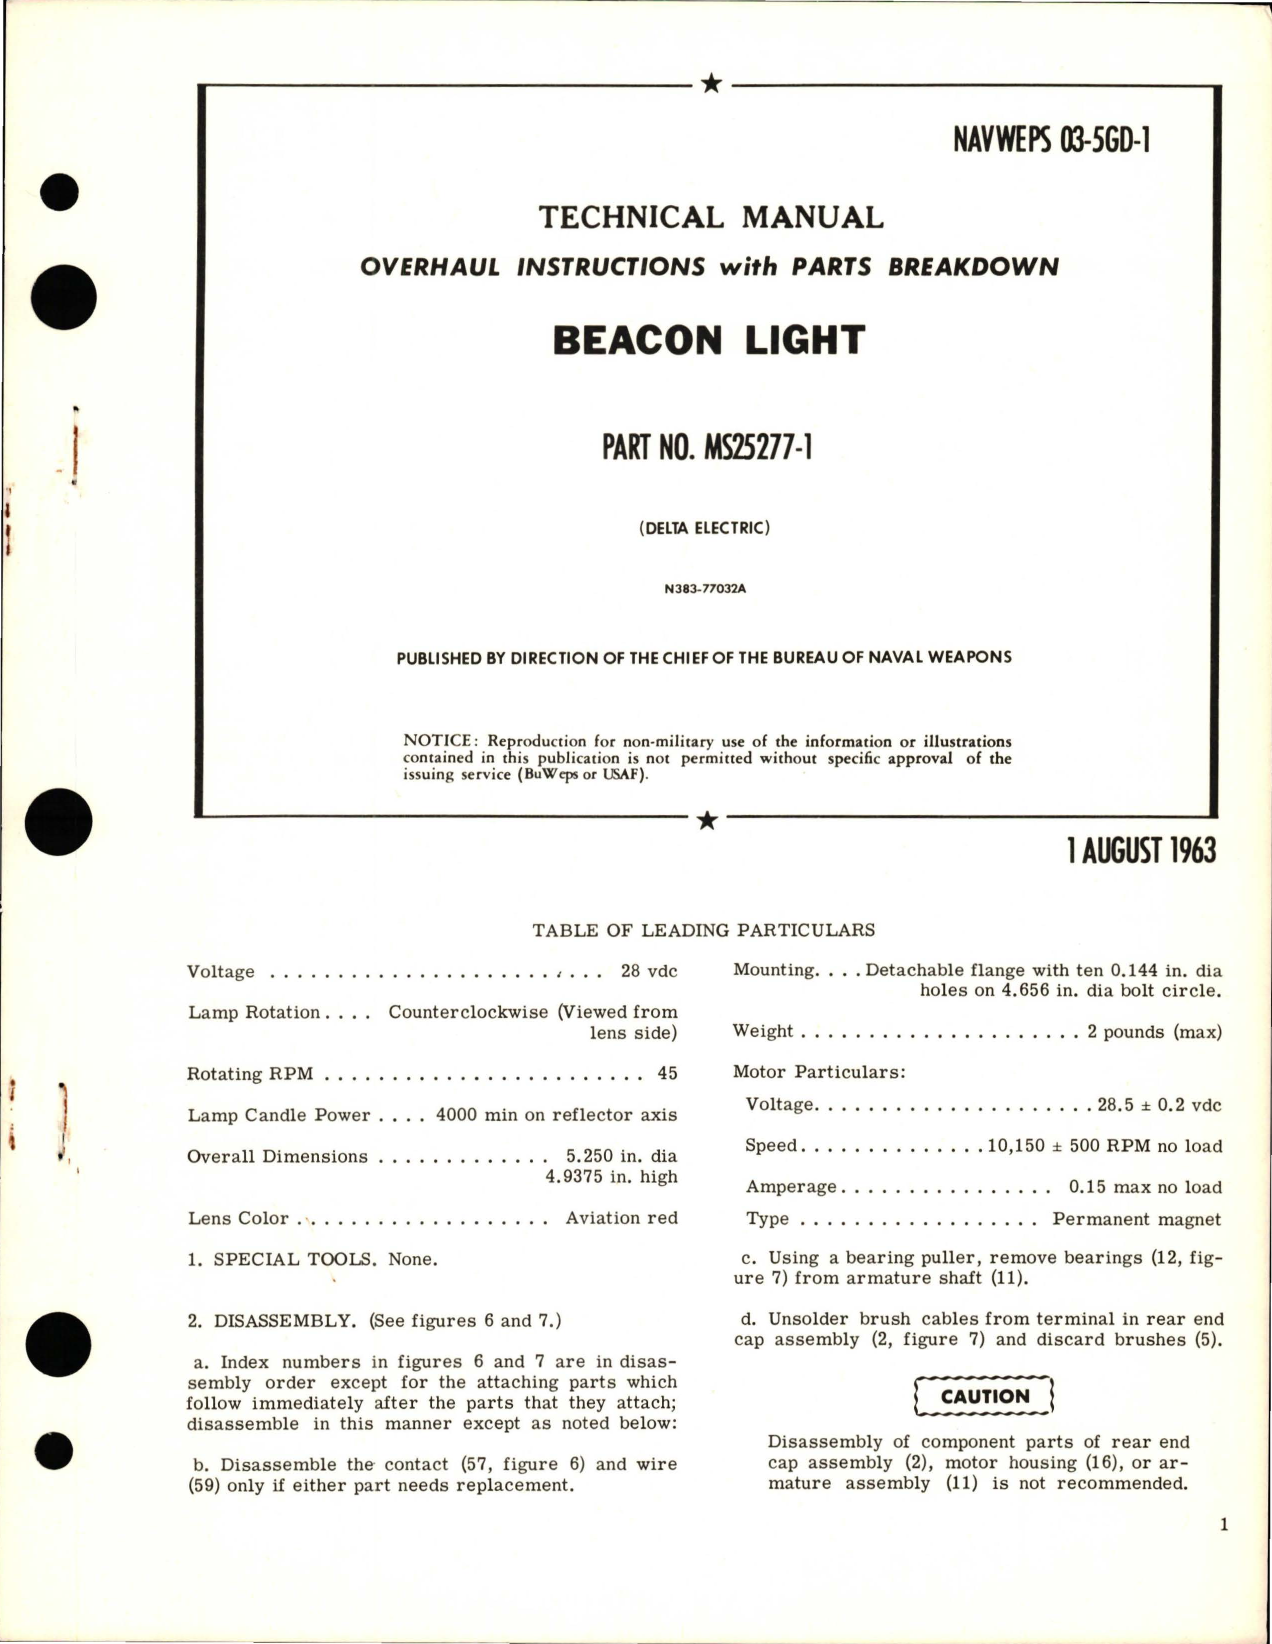 Sample page 1 from AirCorps Library document: Overhaul Instructions with Parts Breakdown for Beacon Light - Part MS25277-1